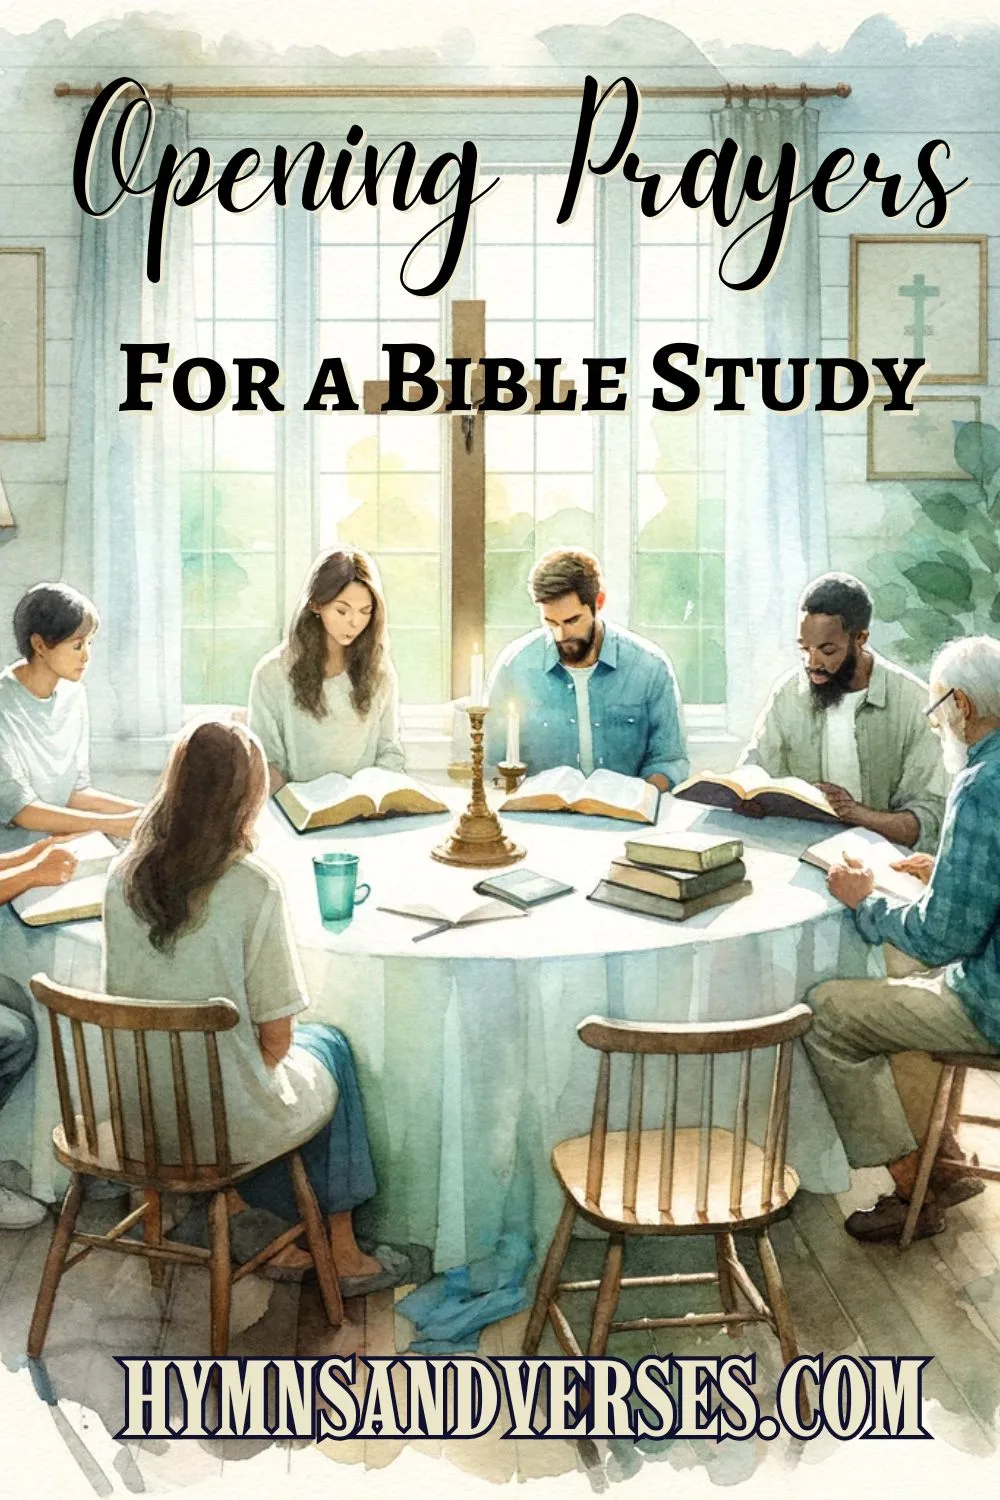 Cover image for opening prayer for bible study post